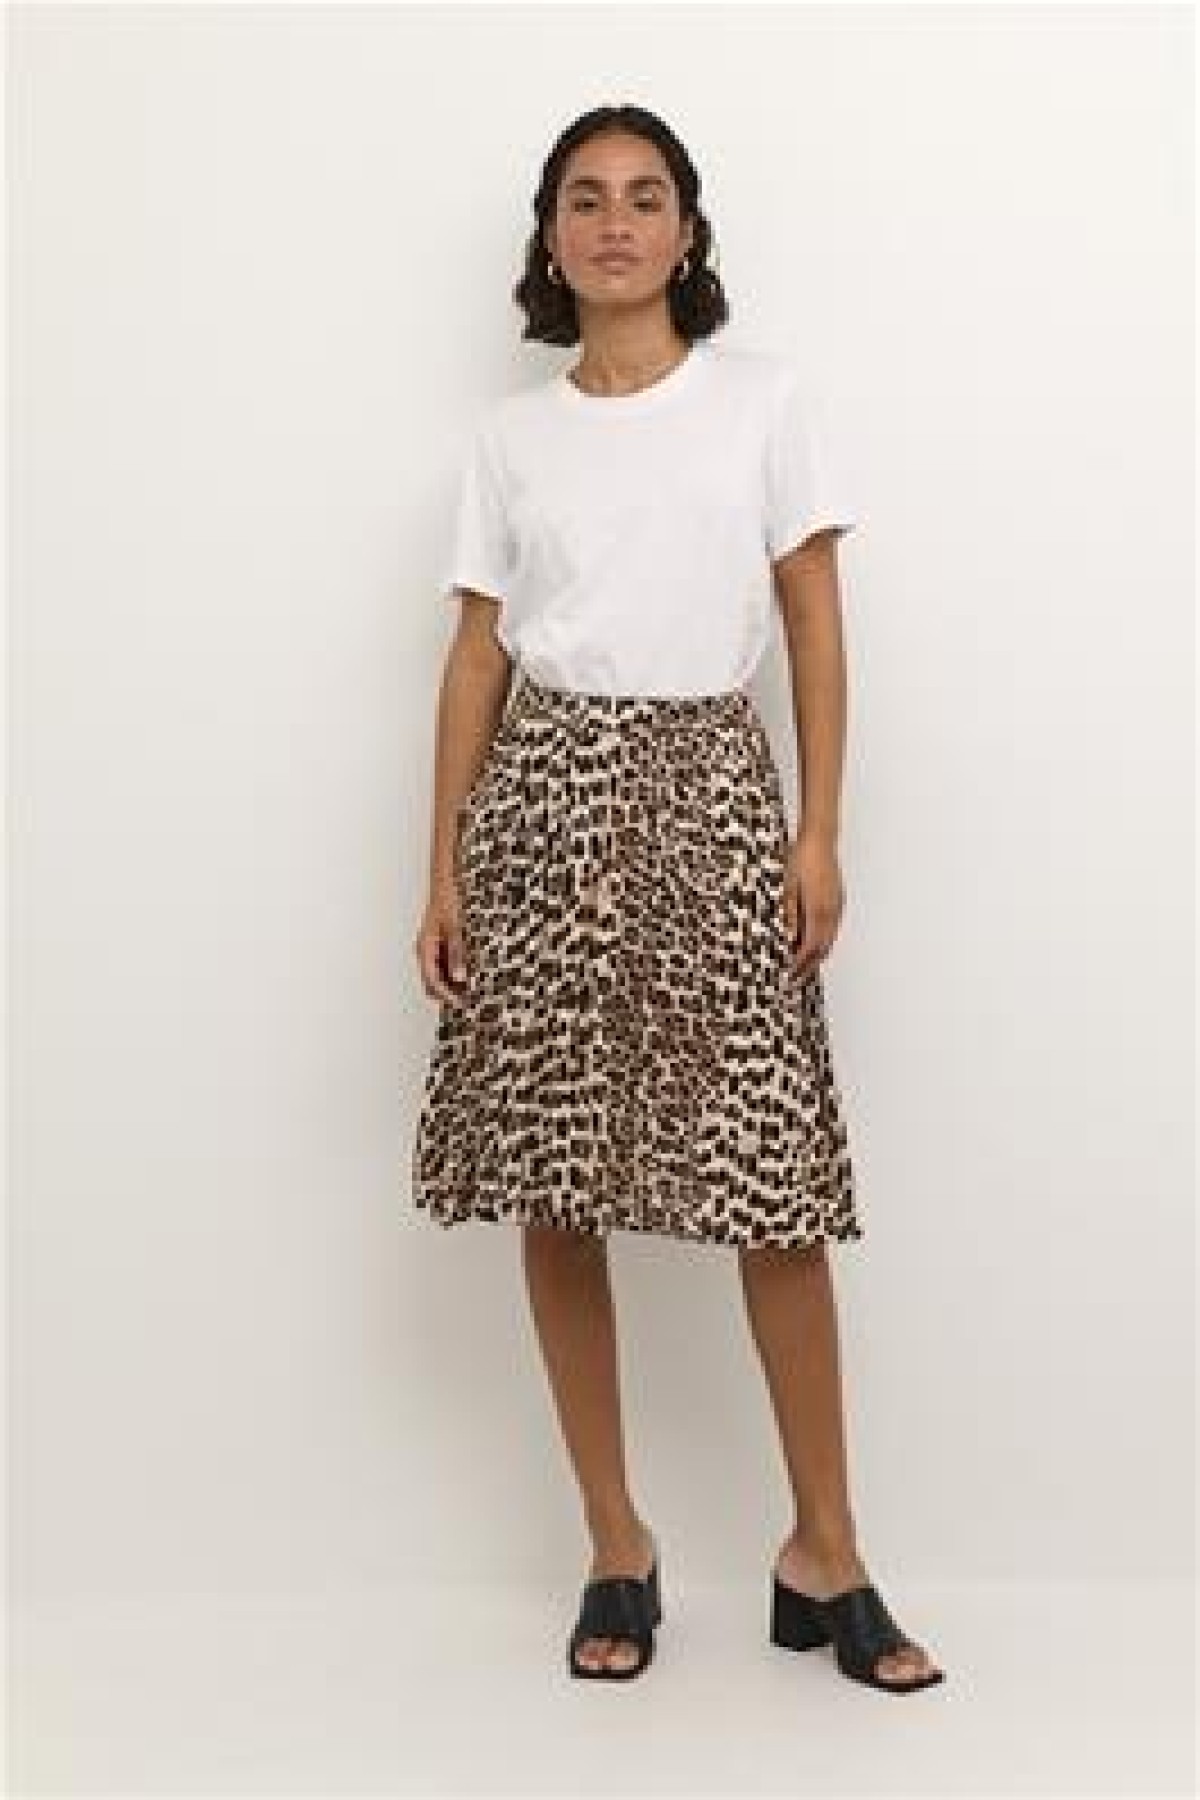 LEOPARD SKIRT WITH POCKETS AND ELASTIC WAIST